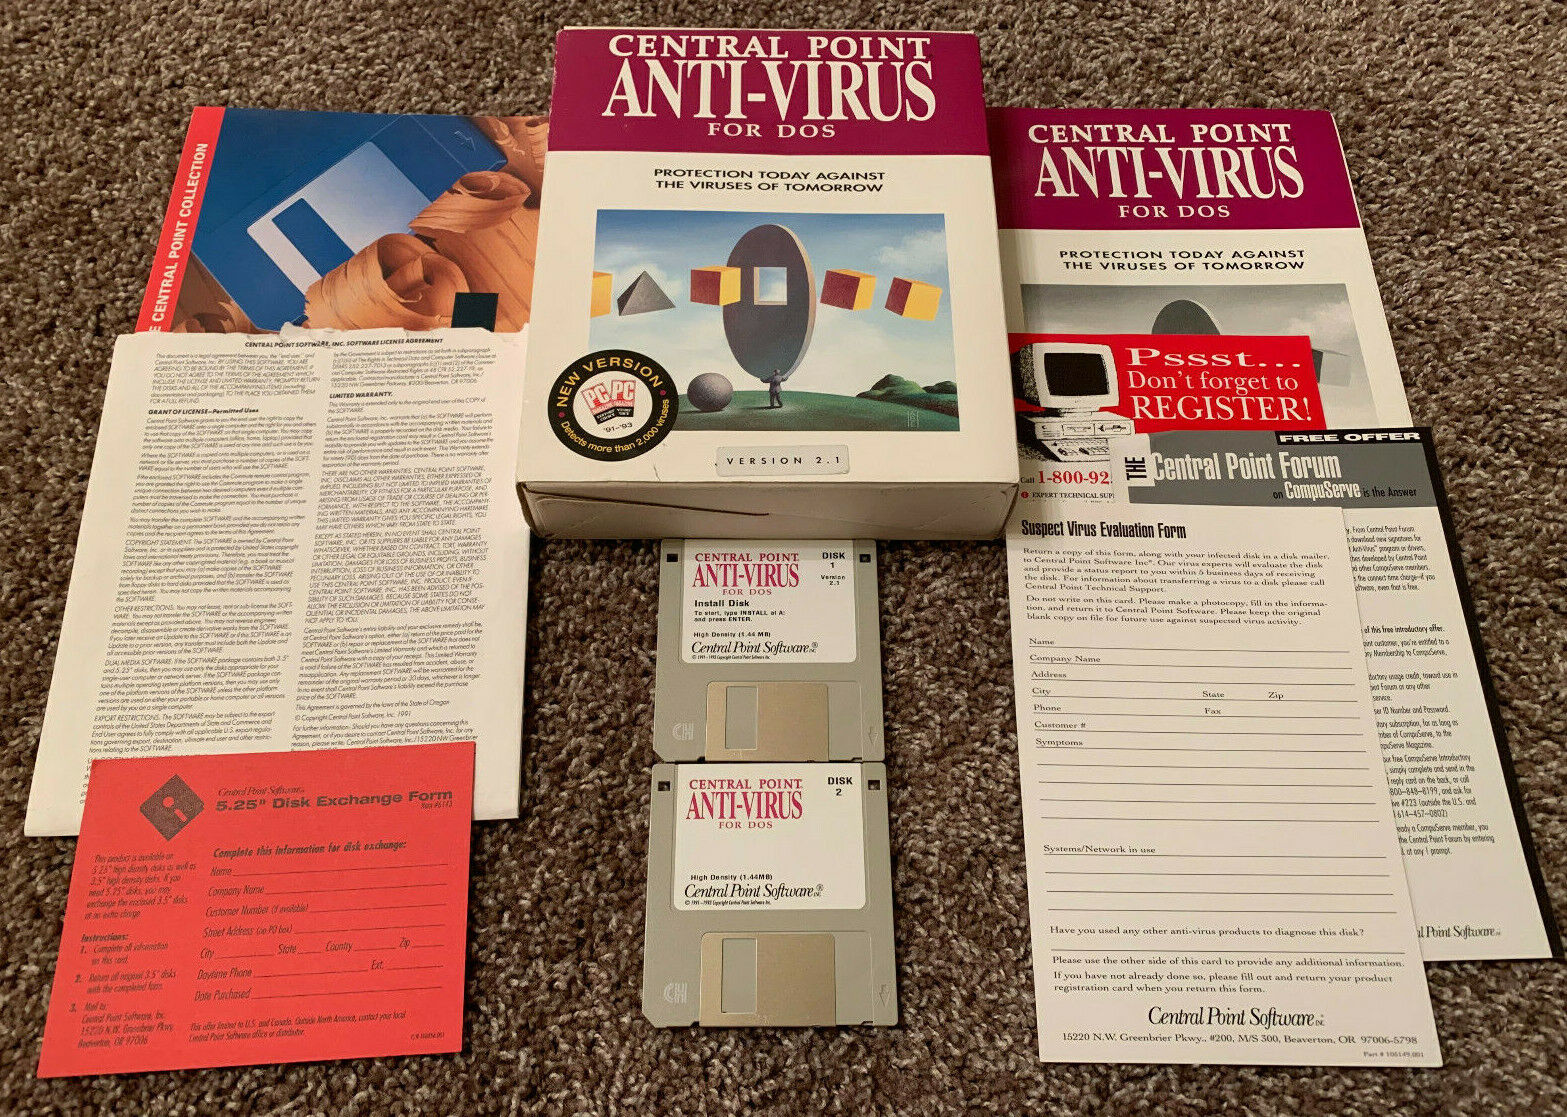 Central Point Anti-Virus Version 2.1 PC Computer MS-DOS Software COMPLETE in Box